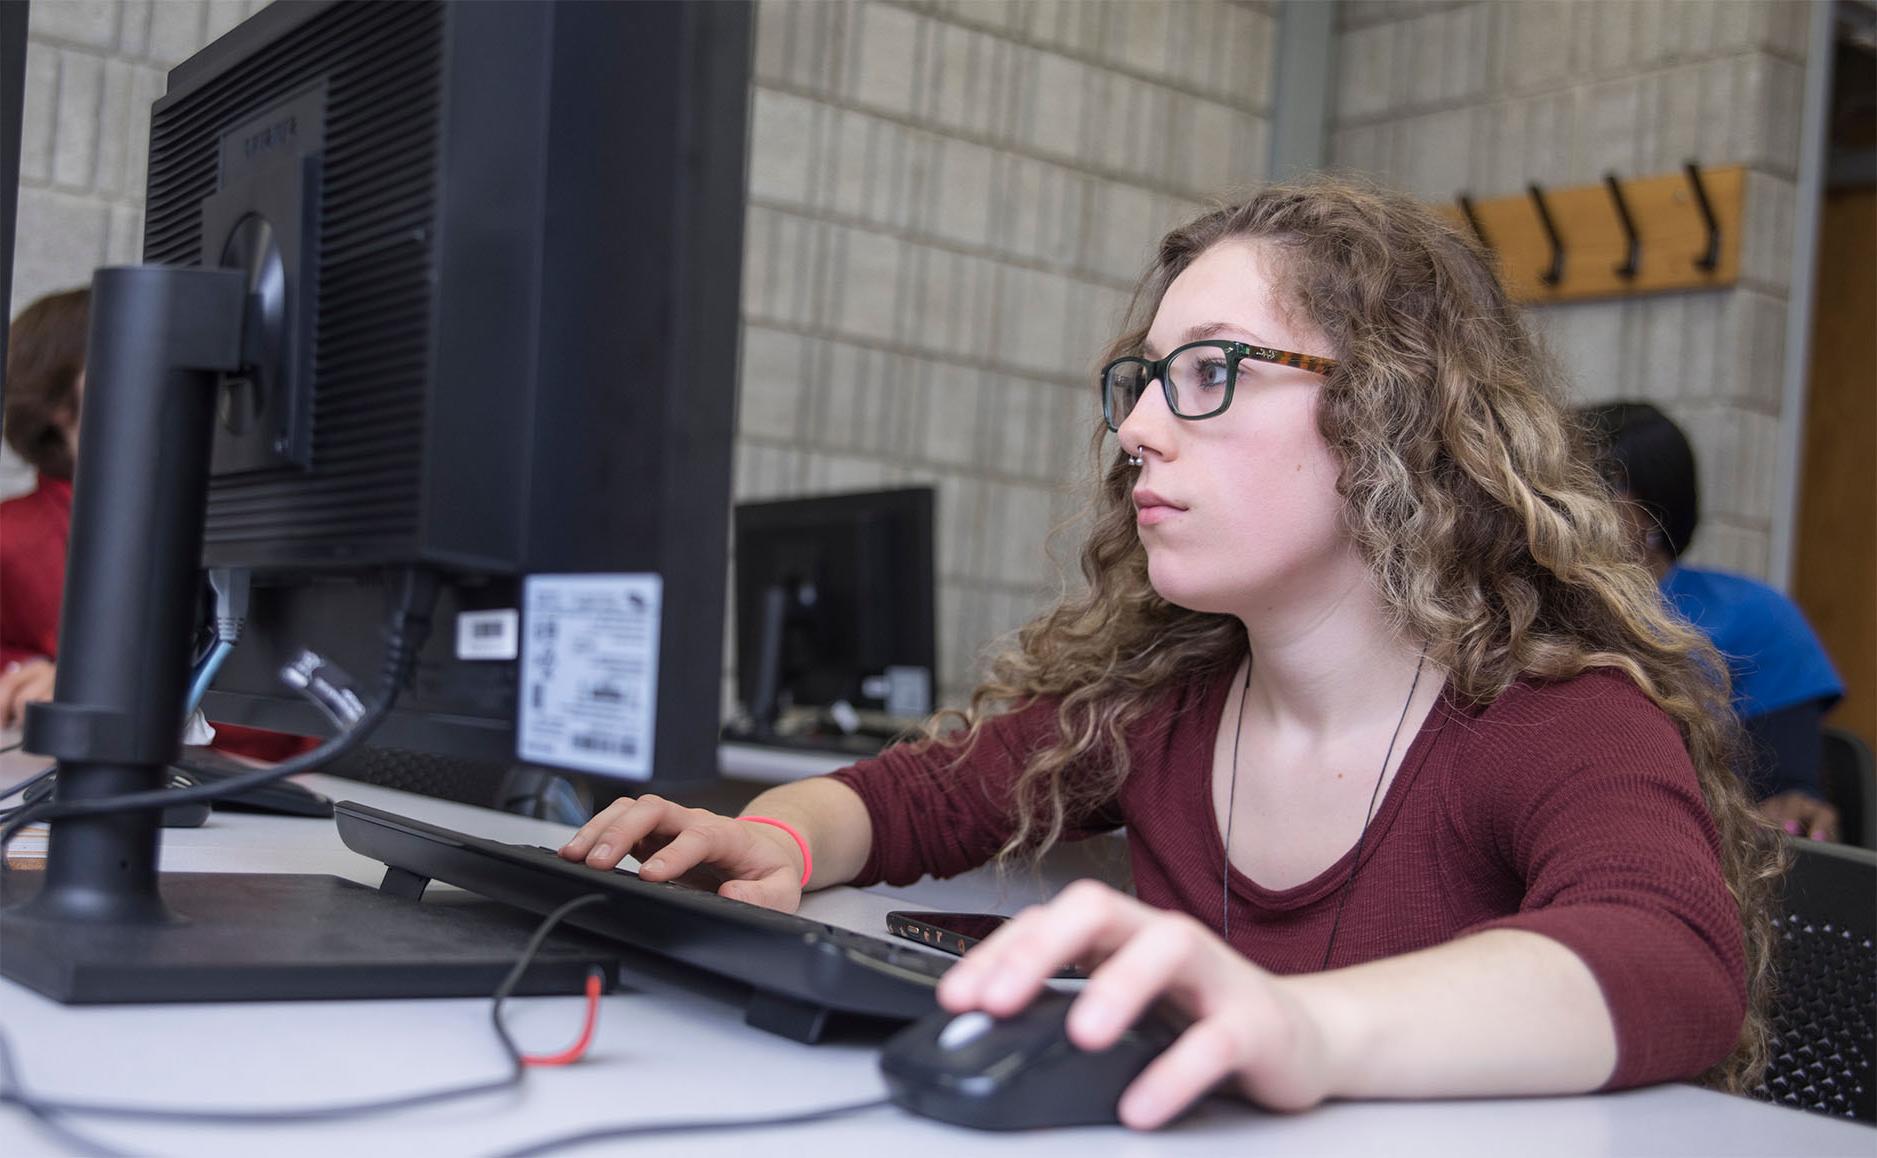 Student working on a computer